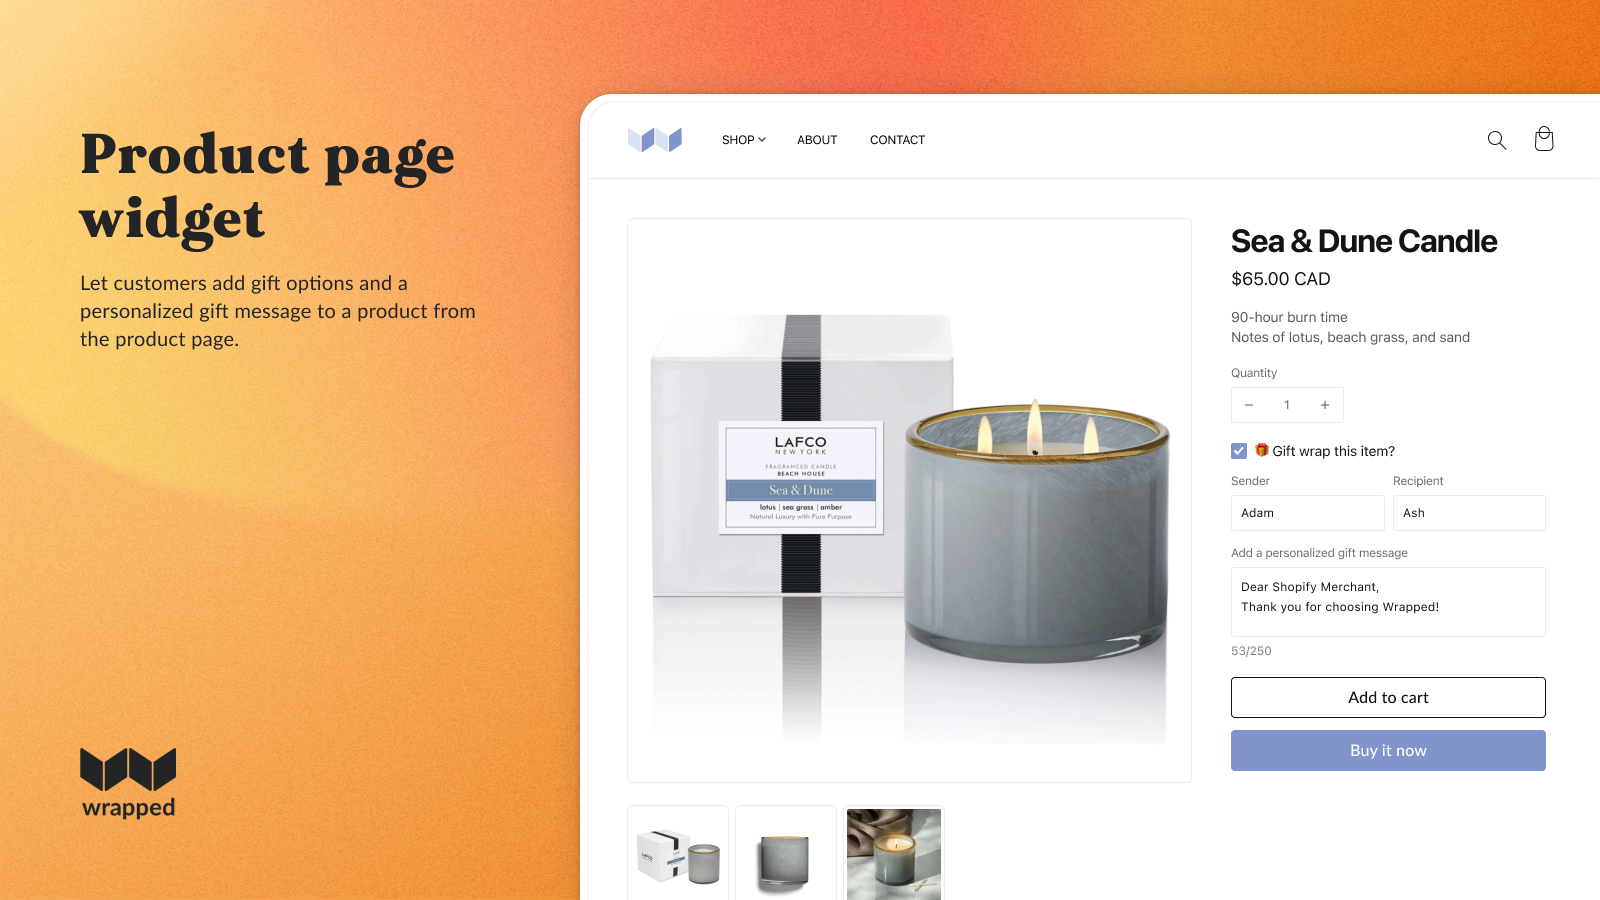 Product page widget. Add gift options from the product page.